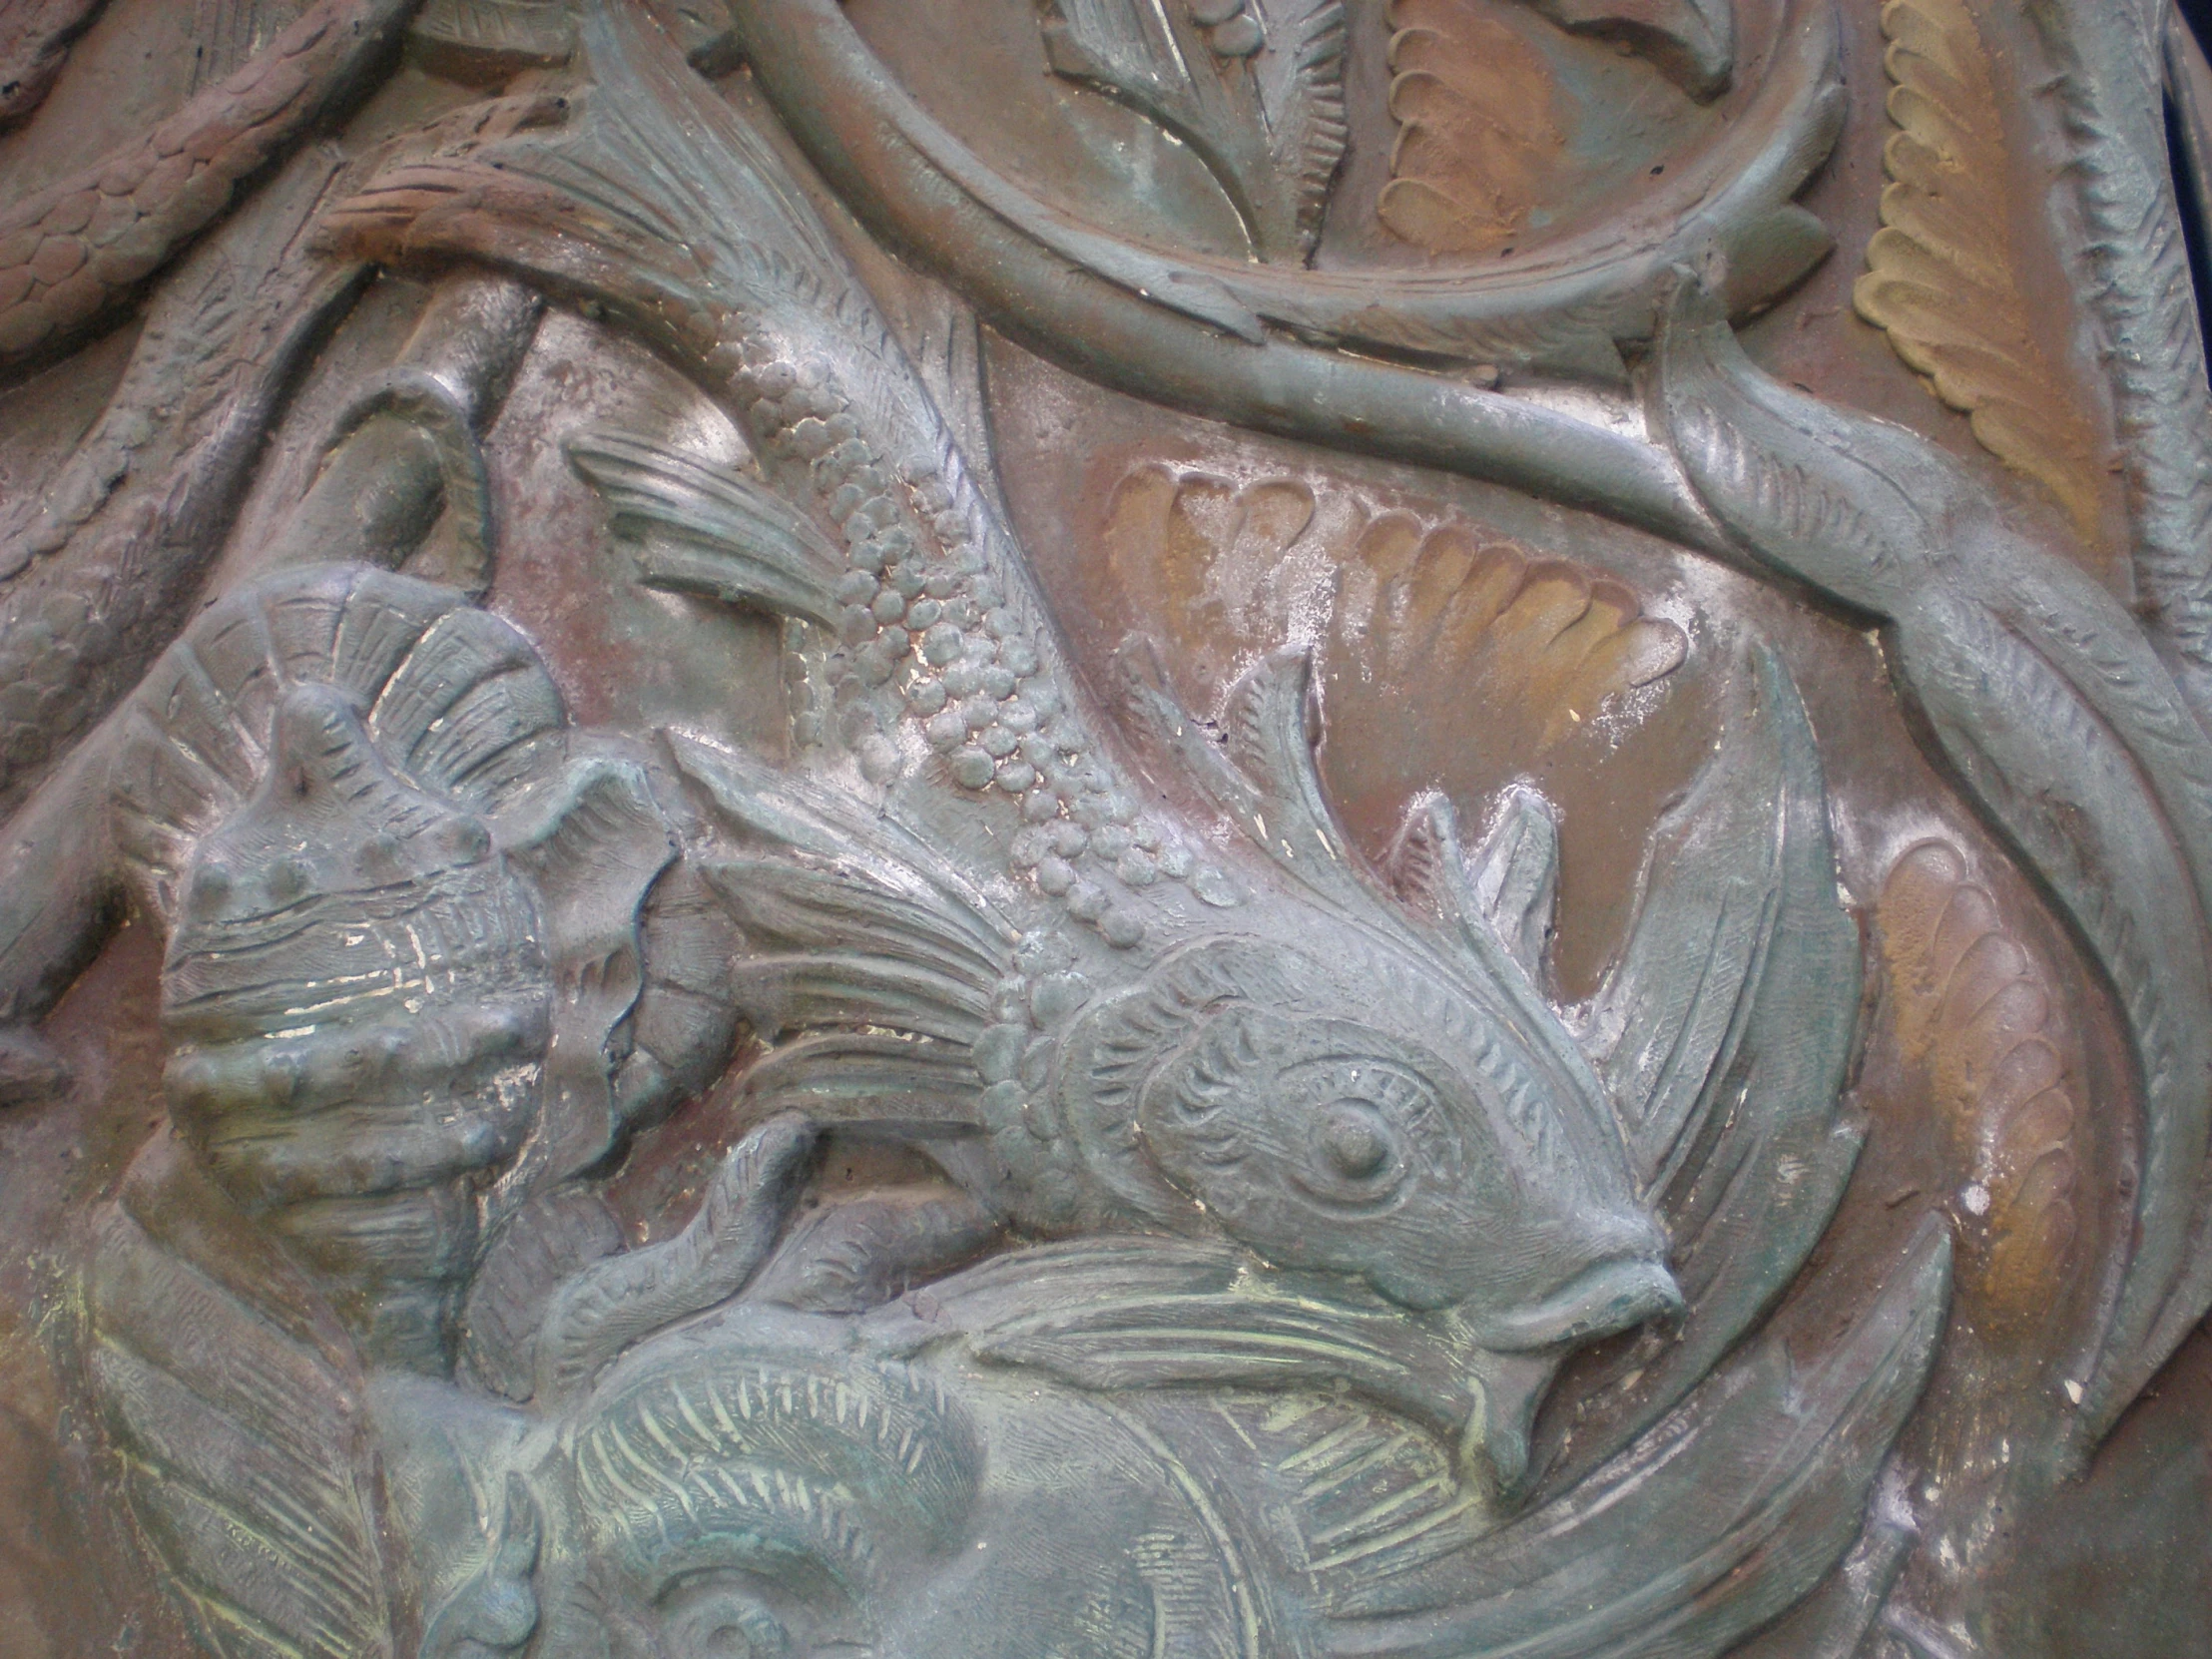 decorative sculpture in center of large piece of metal